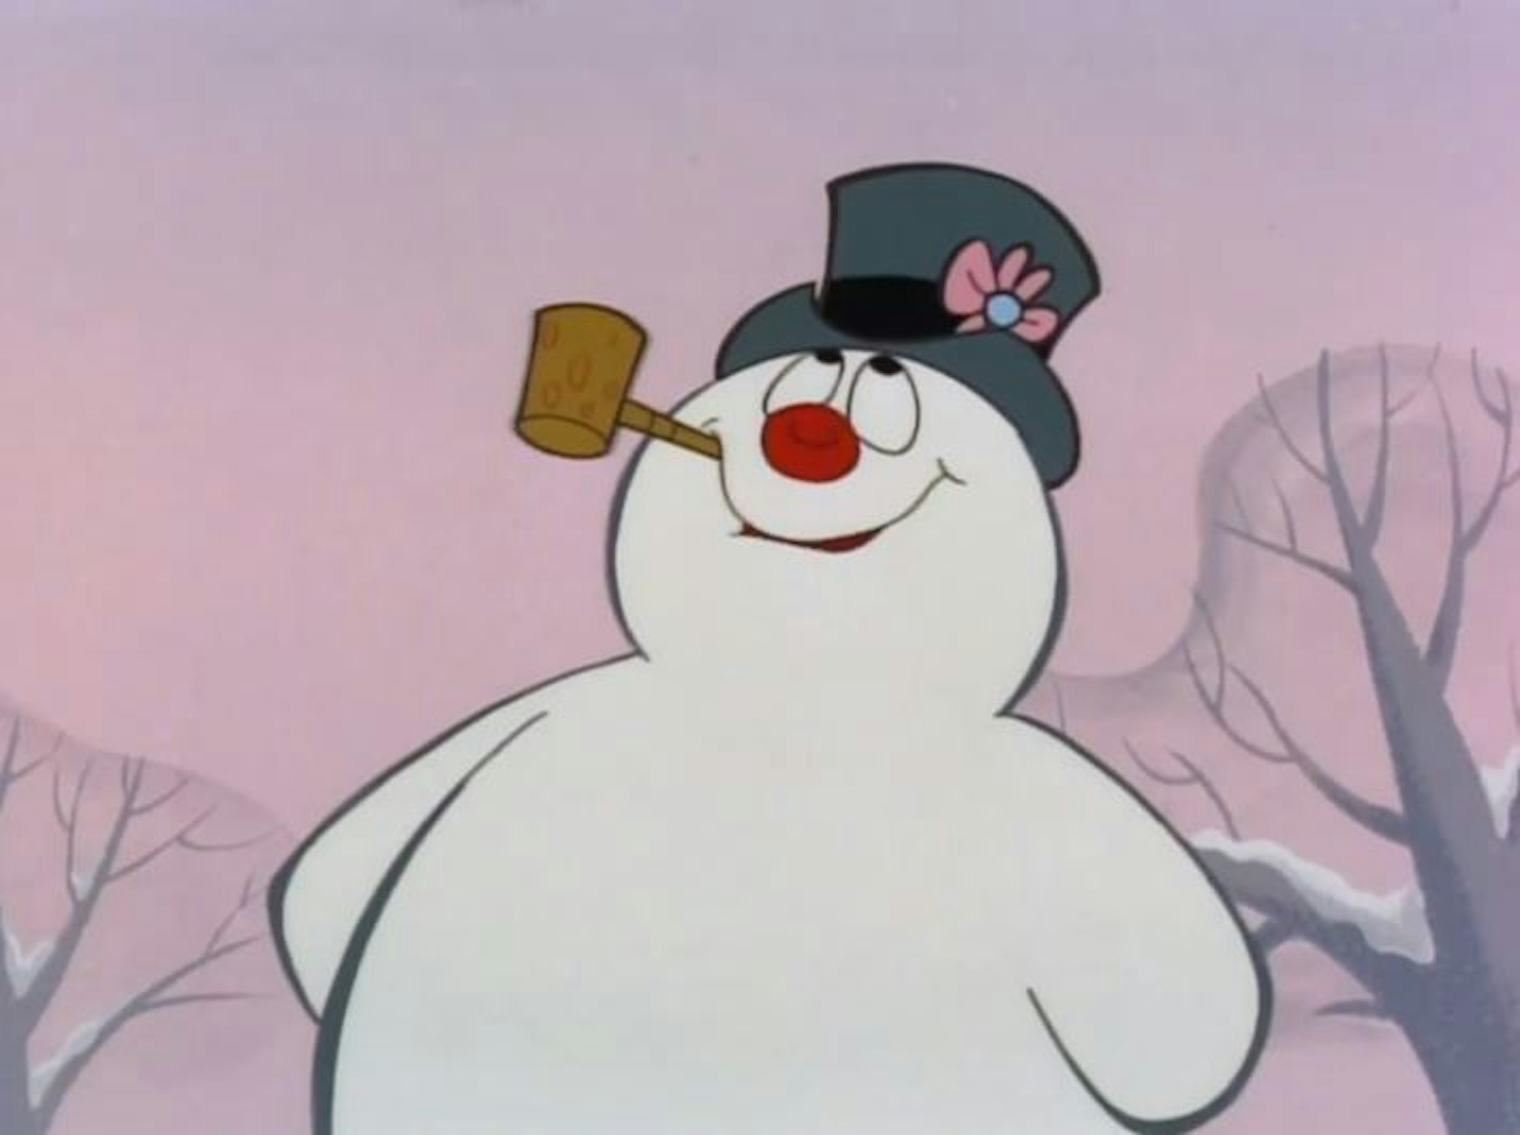 How To Watch 'Frosty The Snowman' In 2020